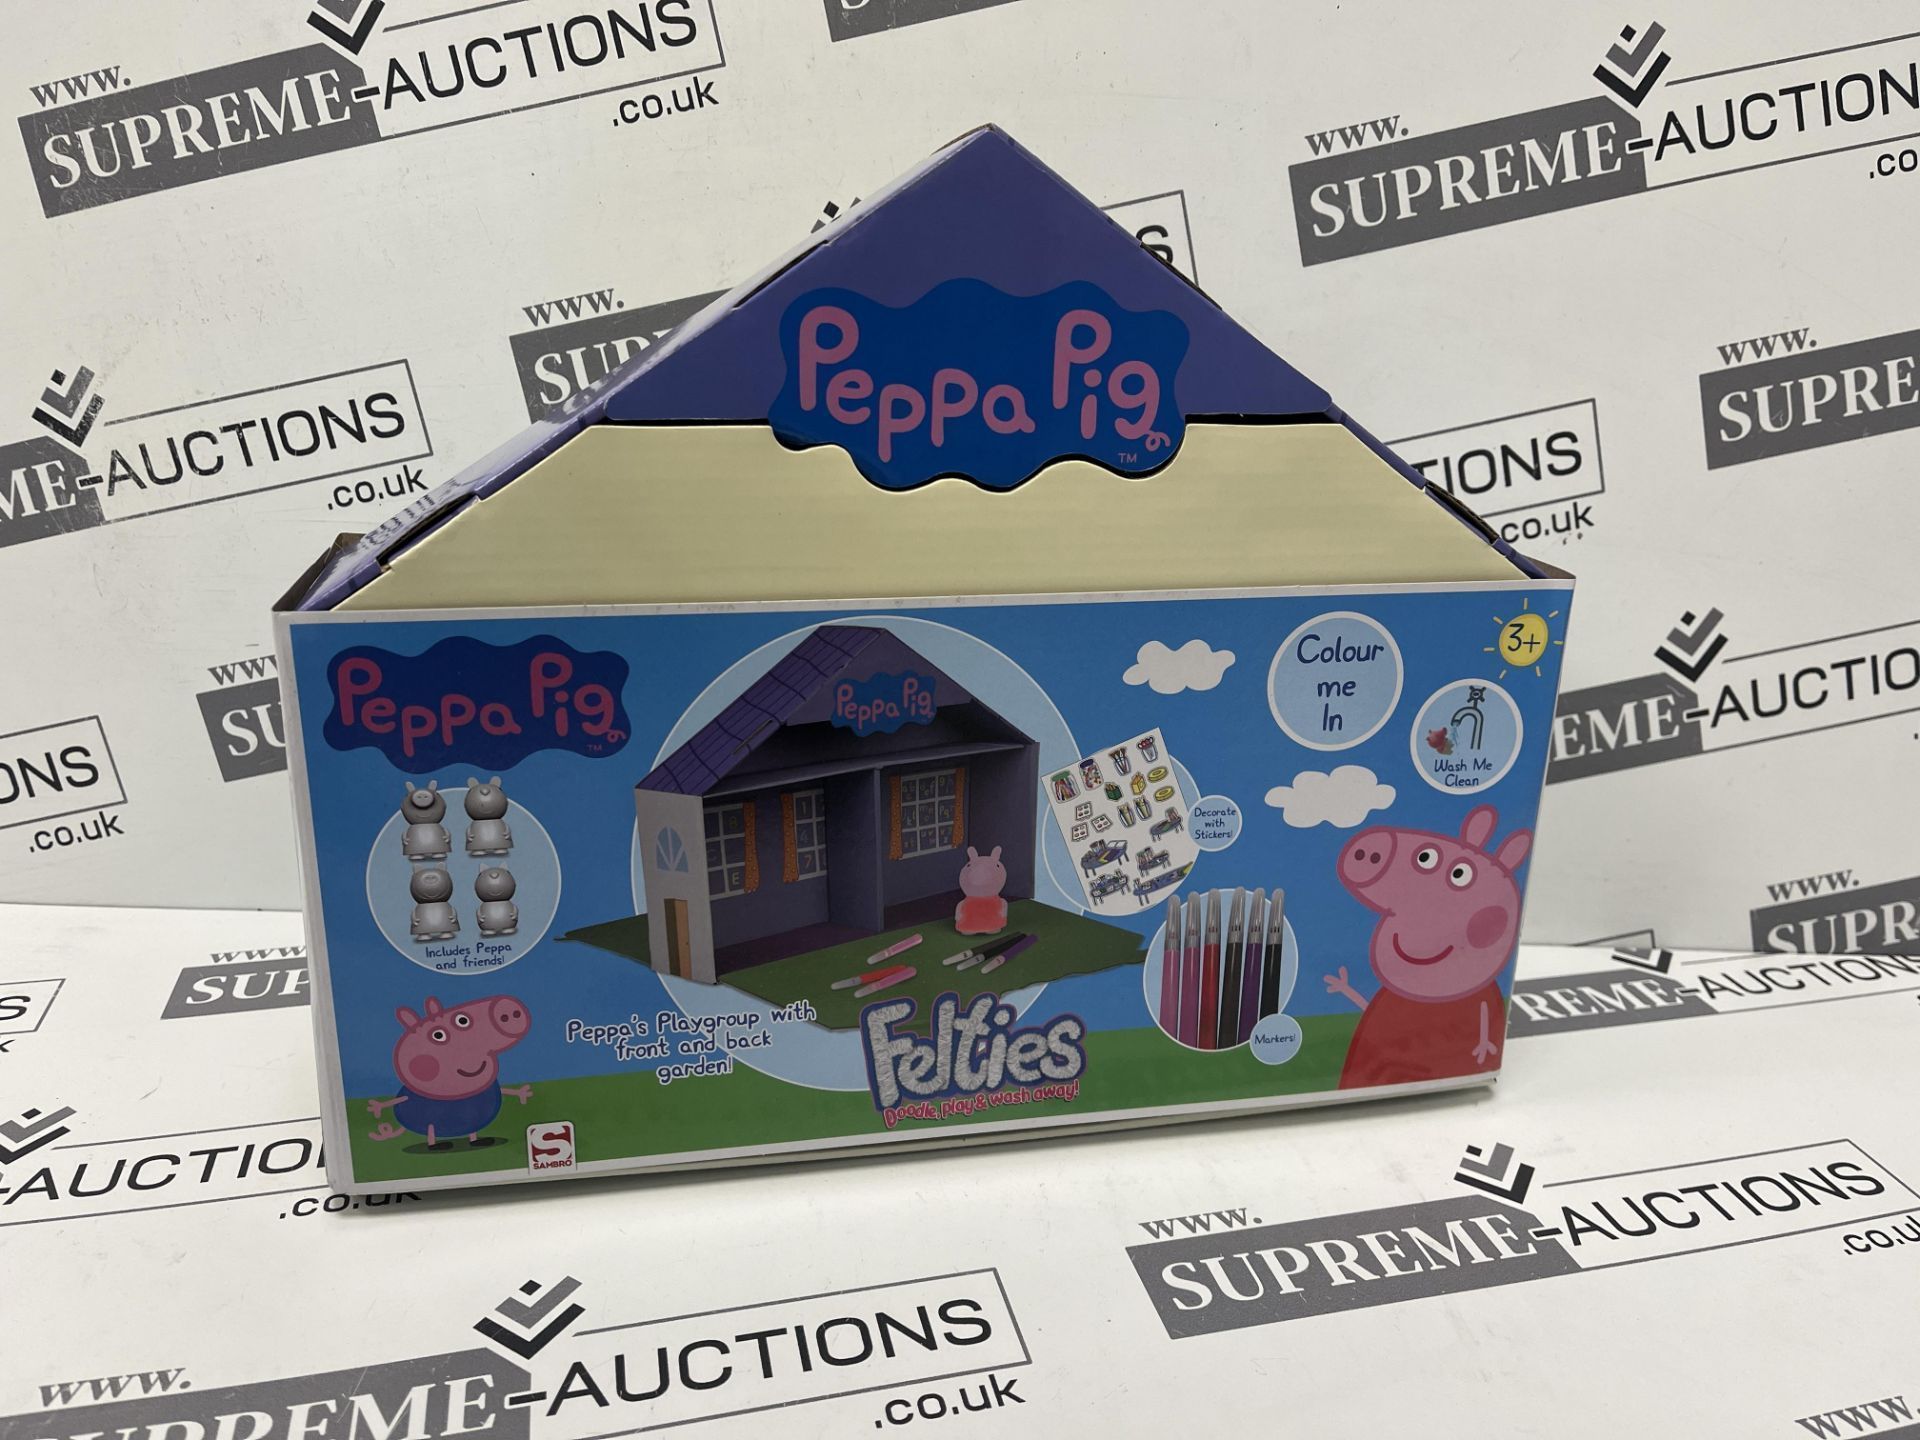 50 X BRAND NEW PEPPA PIG FELITIES COLOUR ME IN PLAYGROUNDS WITH FRONT GARDEN R11.8/11.14